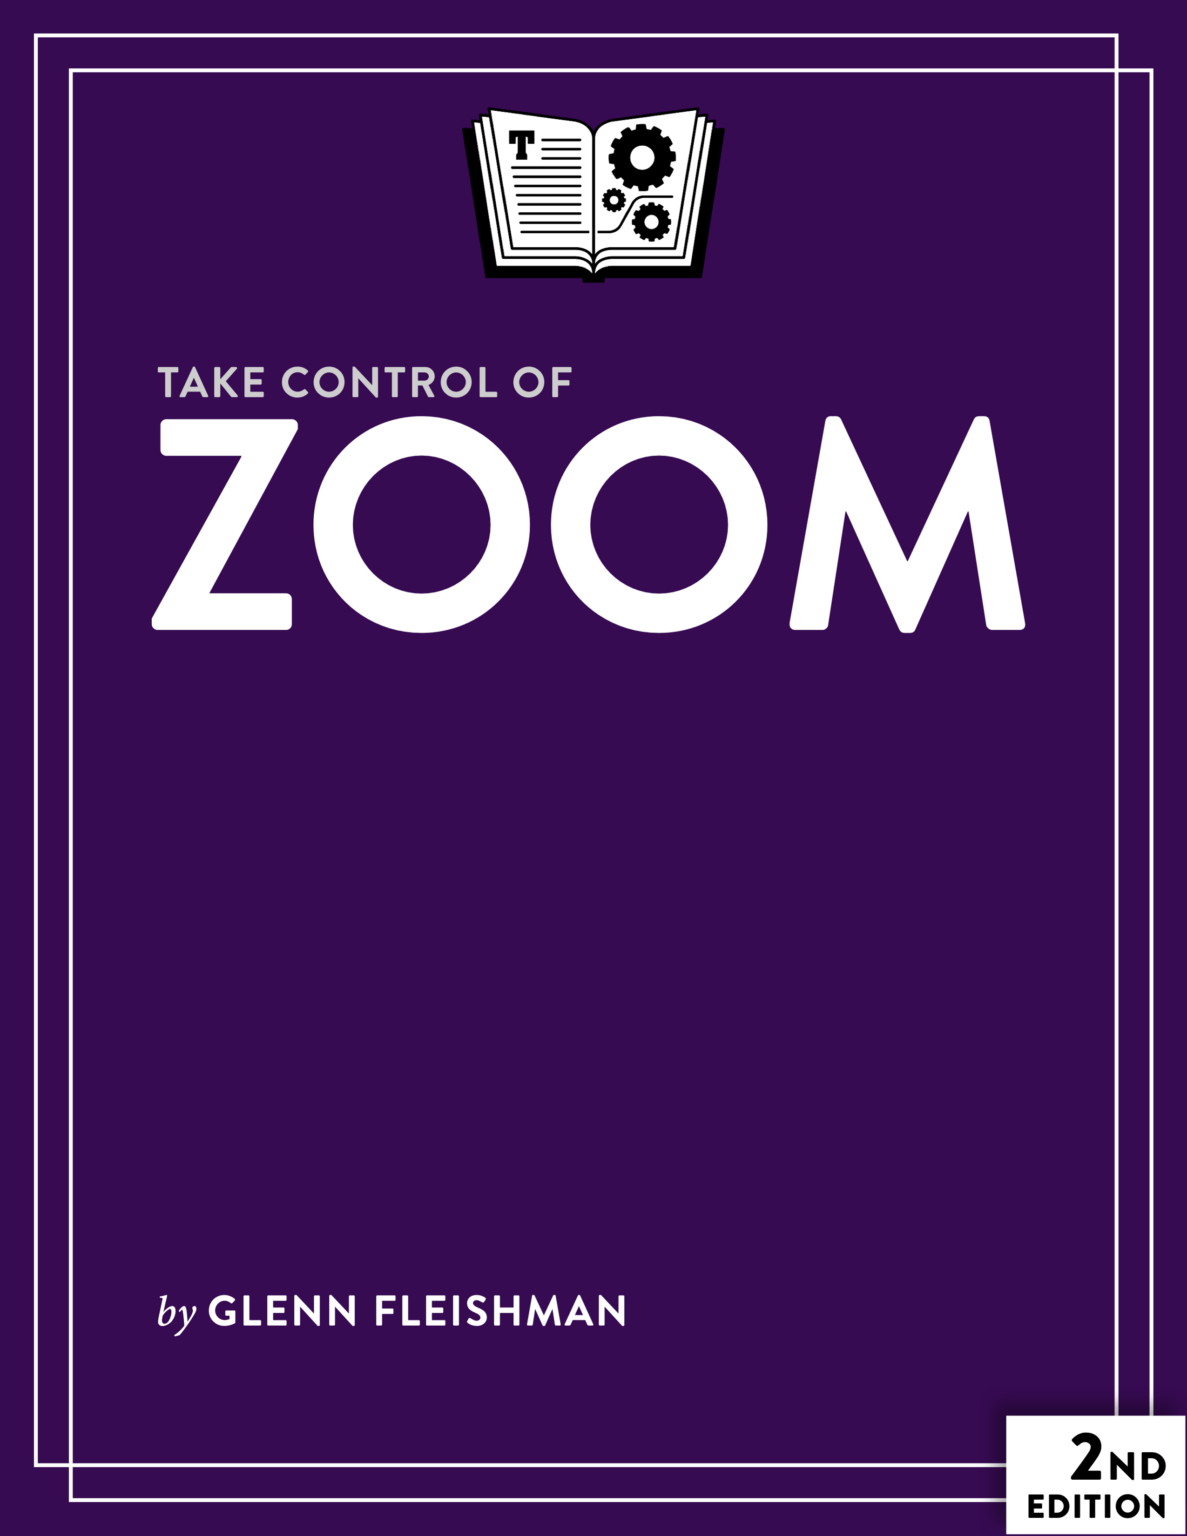 Take-Control-of-Zoom-2.0-cover-1187x1536.png